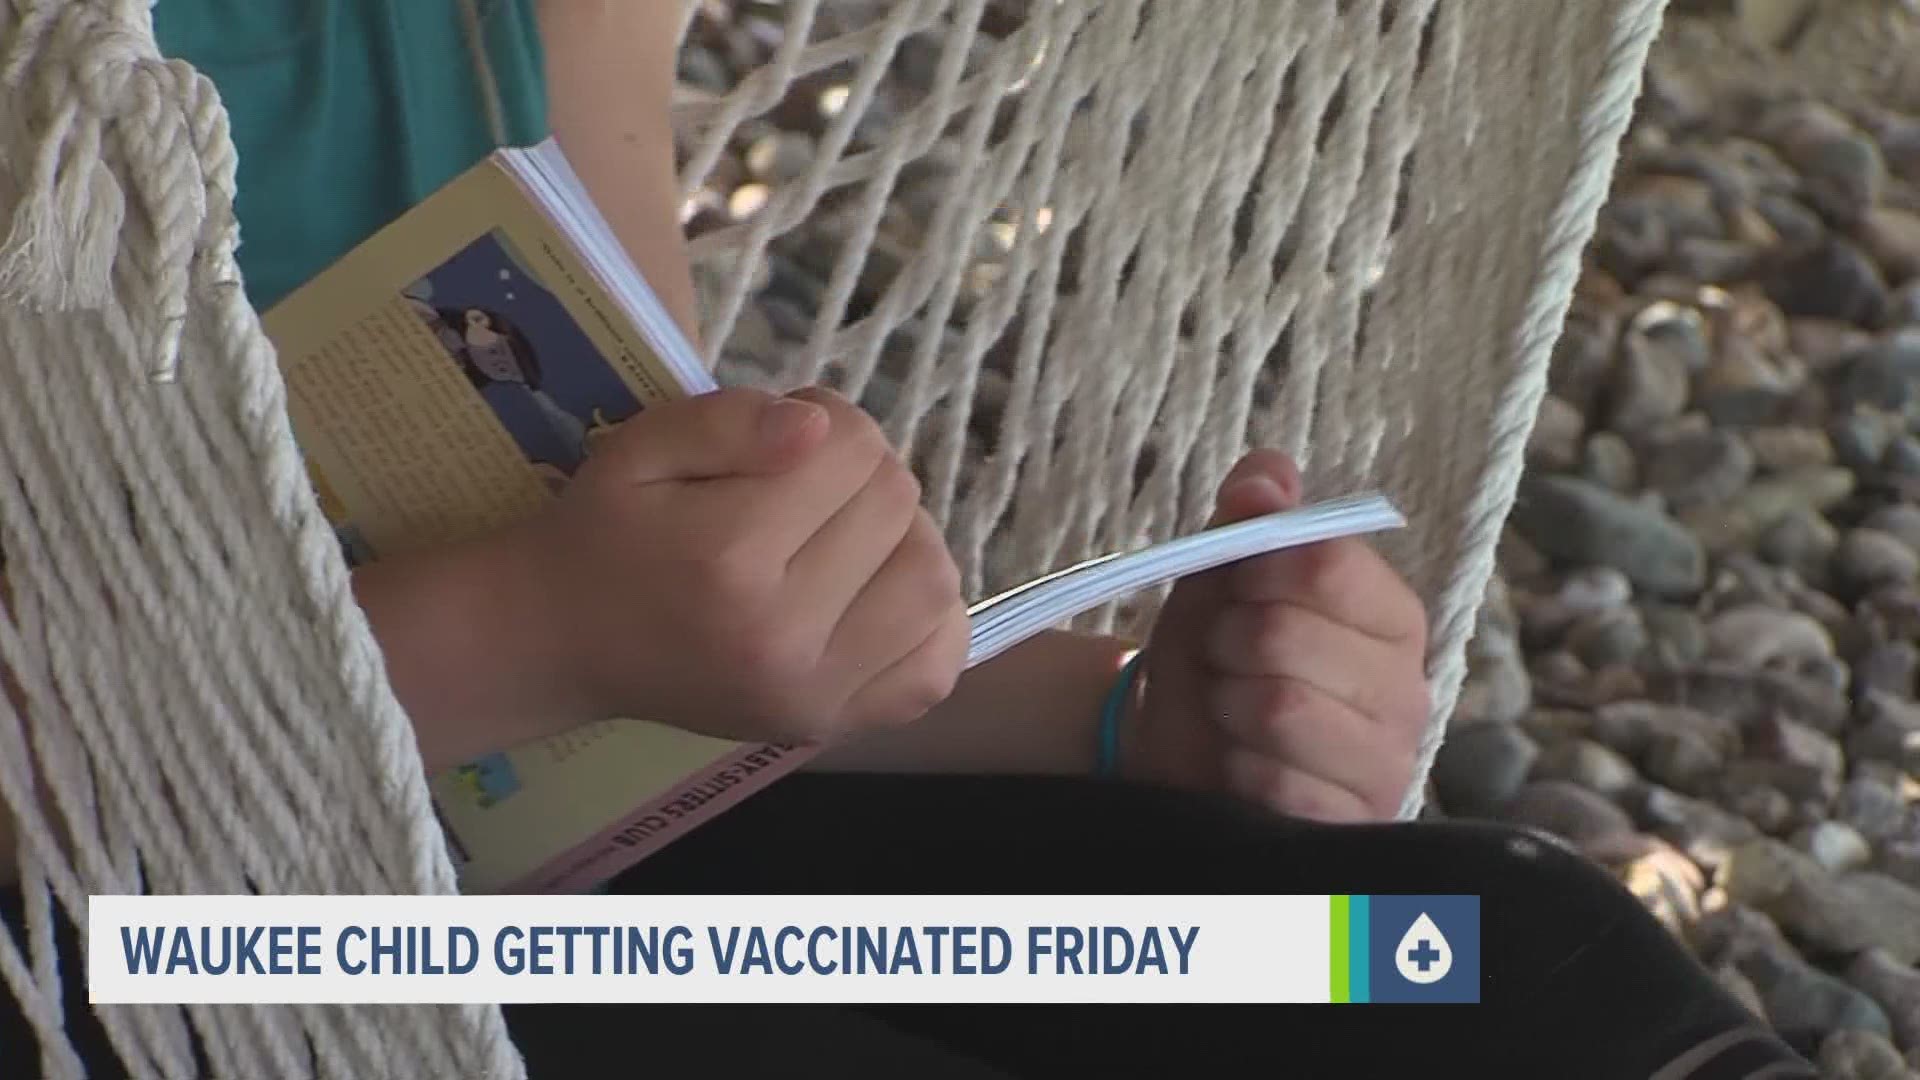 Not many kids are ready to get a shot, but 12-year-old Gretta of Waukee said is excited to be vaccinated by Friday.